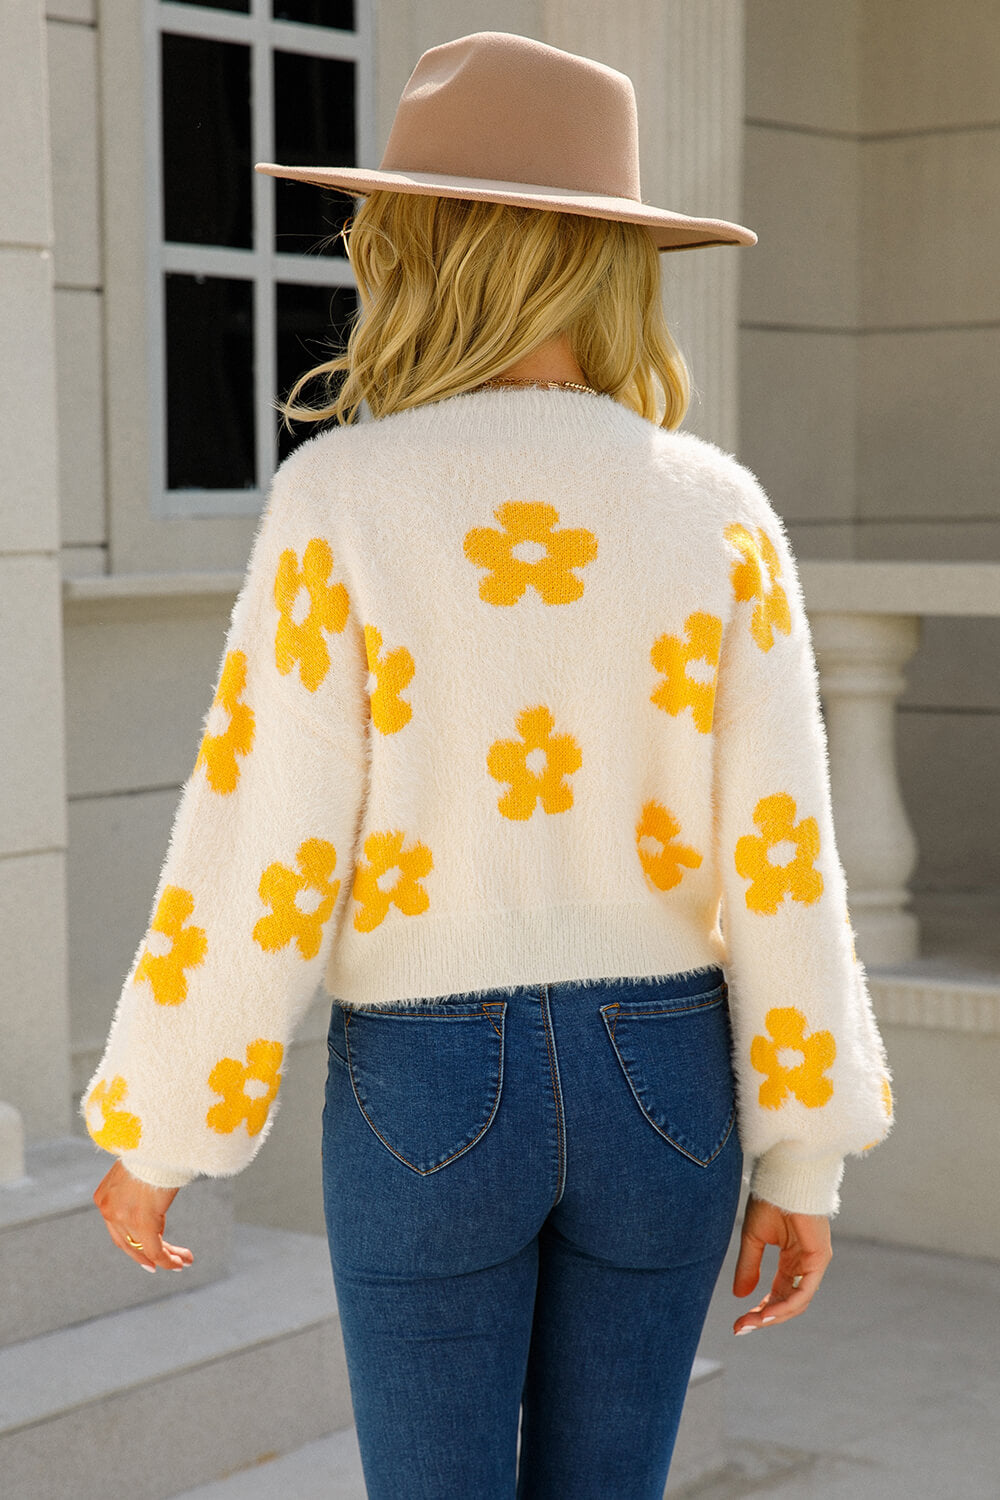 Floral Open Front Fuzzy Cardigan - Women’s Clothing & Accessories - Shirts & Tops - 16 - 2024